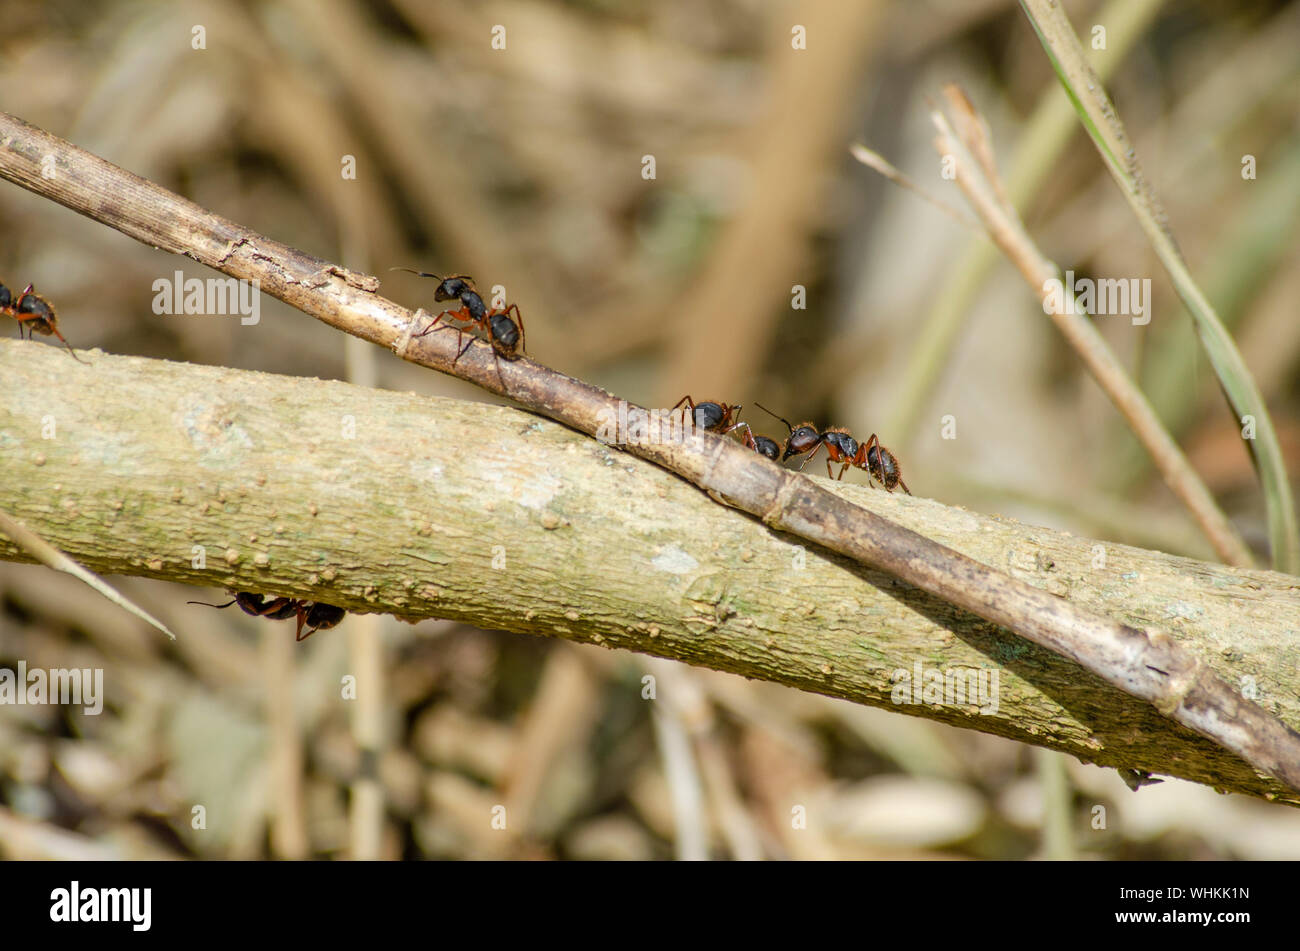 A group of camponotus rufipes, a common type of south american ants, walks on a branch to scouts for damage after a disturbance to their nest. Stock Photo